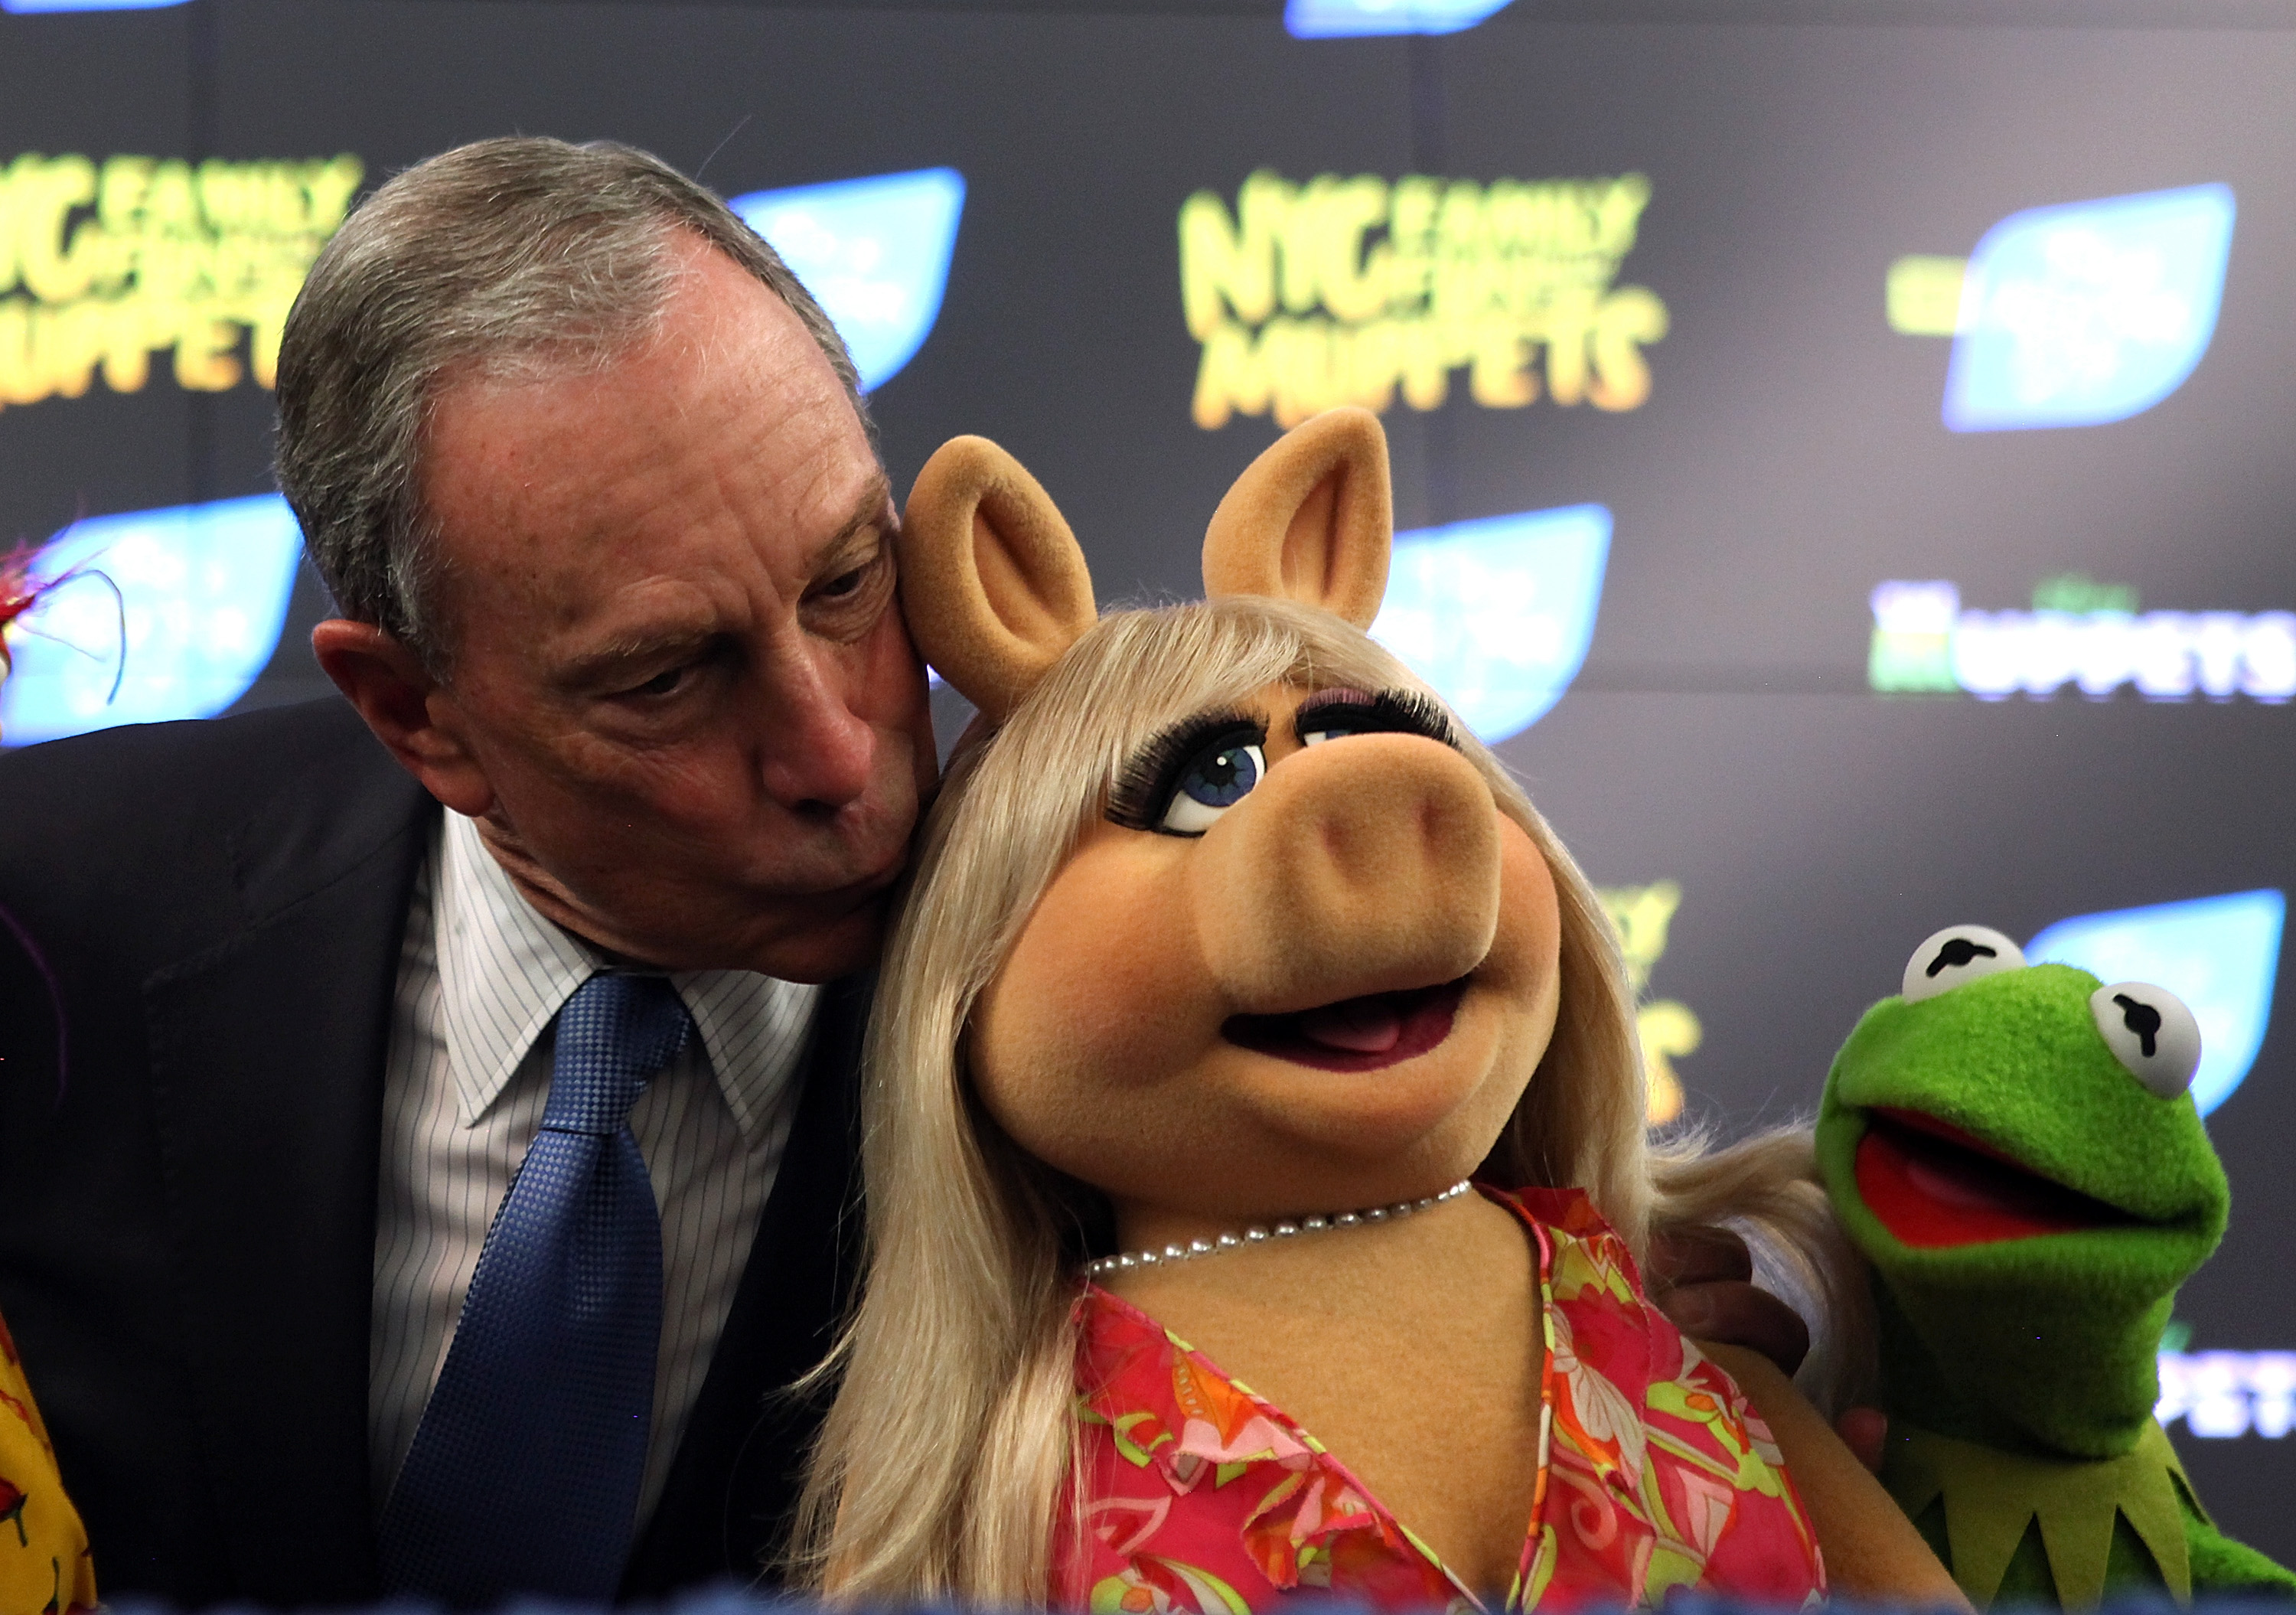 New York City Mayor Michael Bloomberg kisses Muppet Miss Piggy as Kermit the Frog looks on during a news conference on April 13, 2012 in New York City.